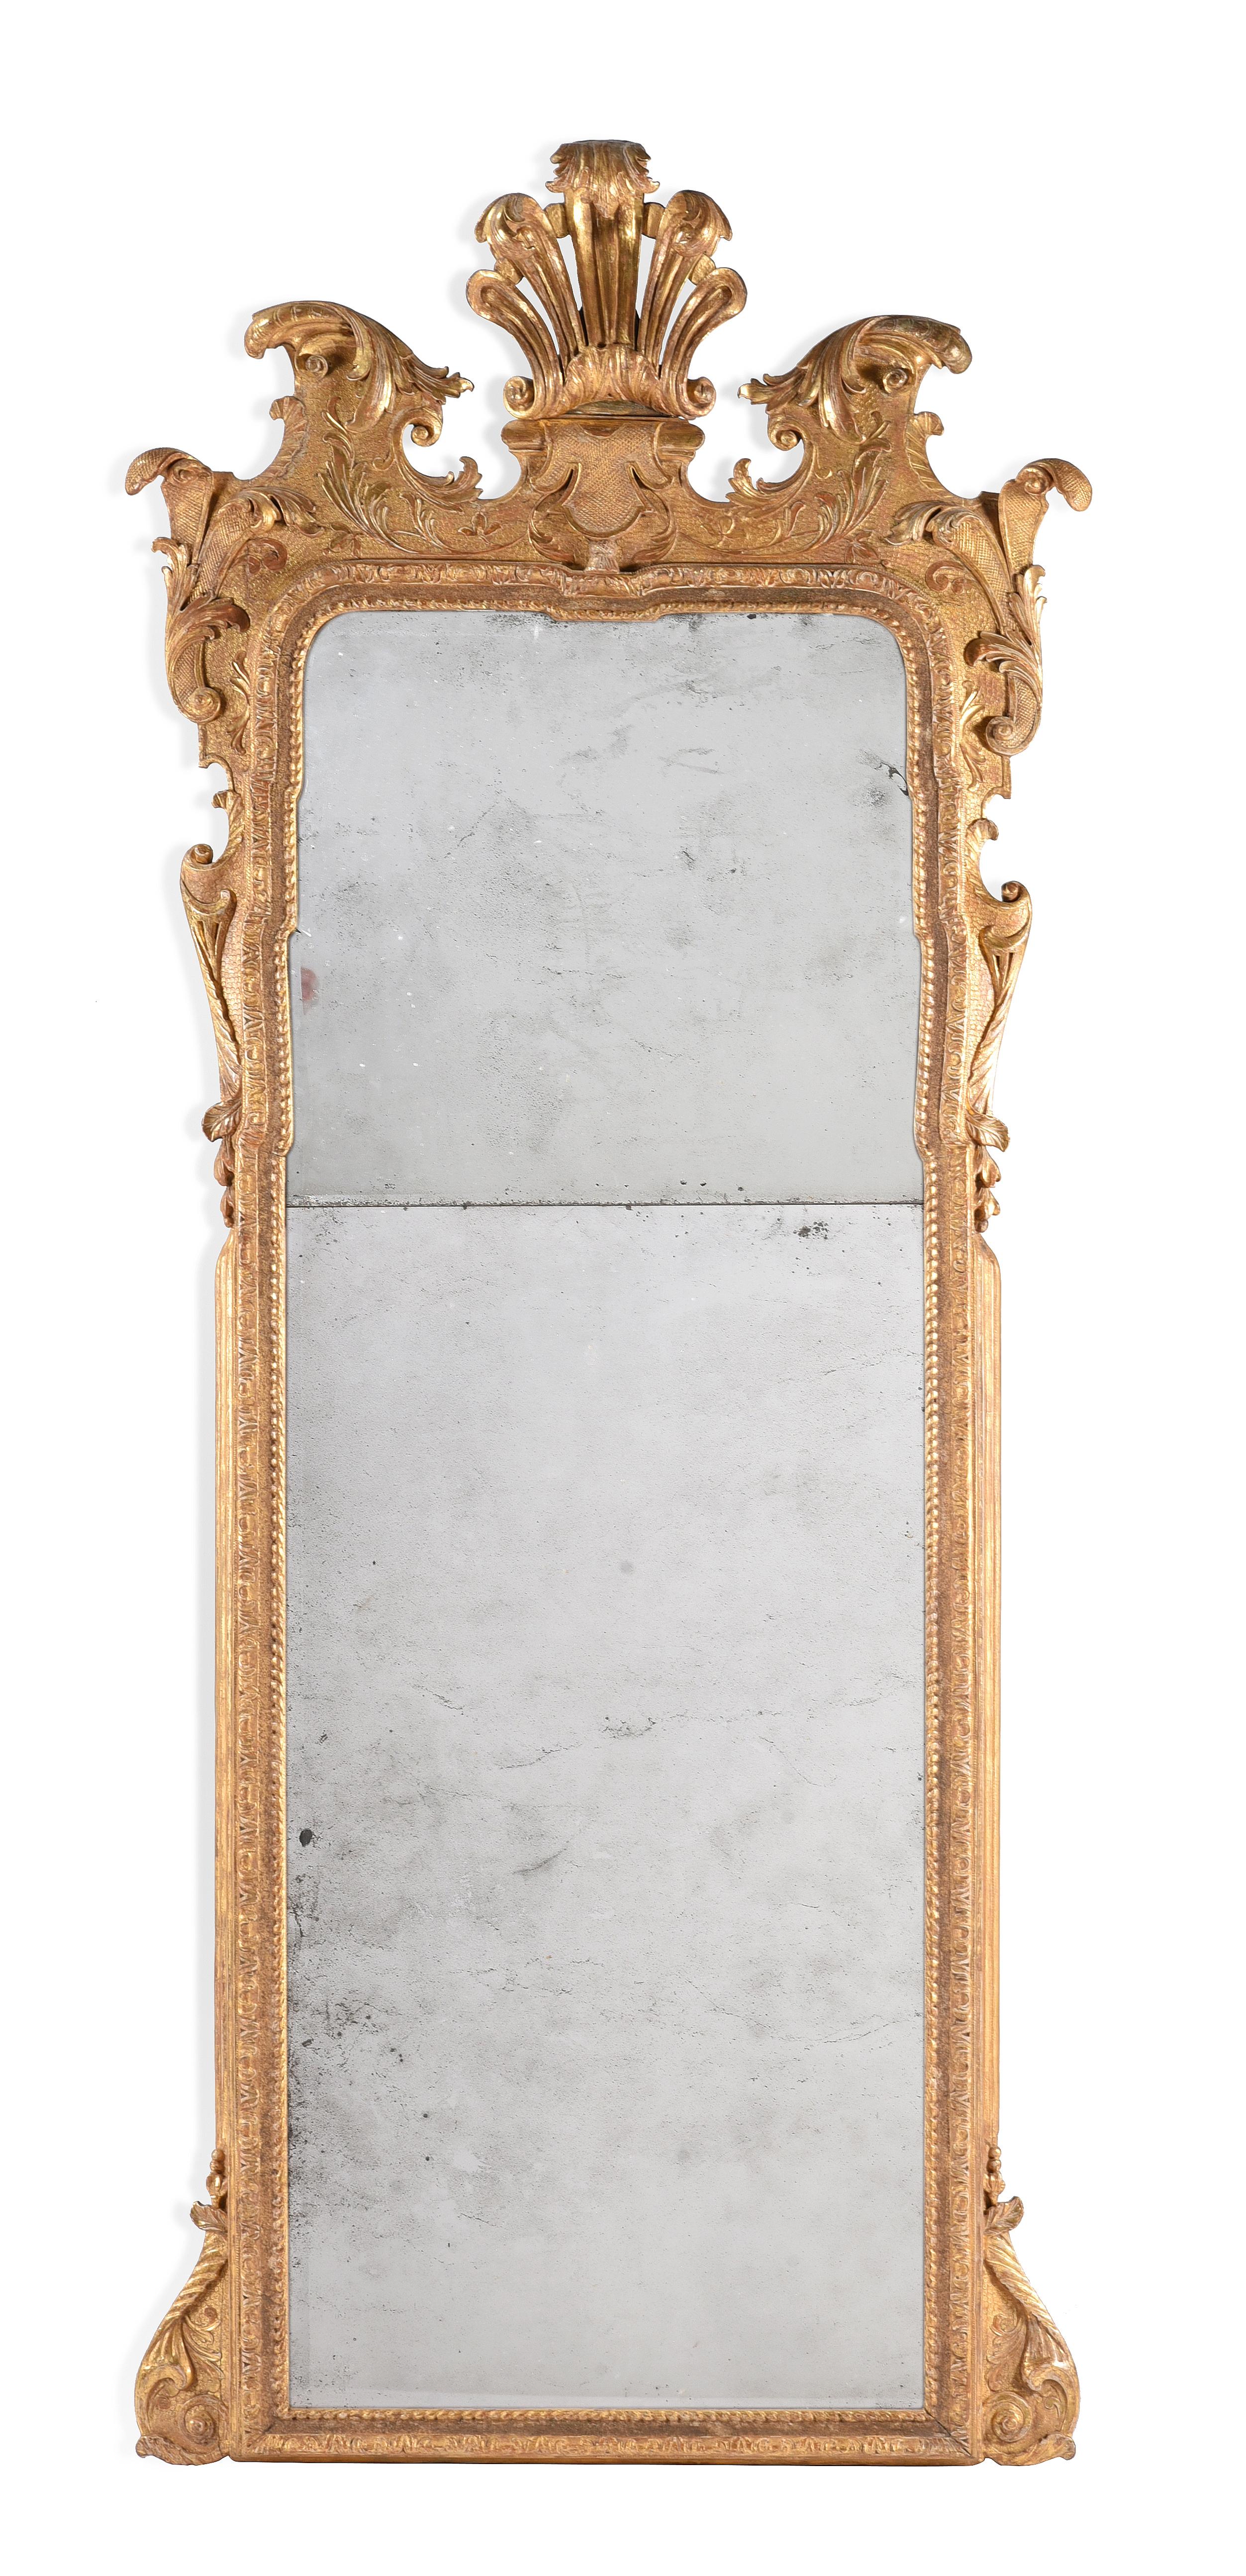 A Large and Important George I Gilt-Gesso Pier Glass, Attributed to John Belchier, Circa 1725. England.

Divided by the original arched and rectangular soft bevelled mirror plates within a gadrooned and foliate-carved border surmounted by an